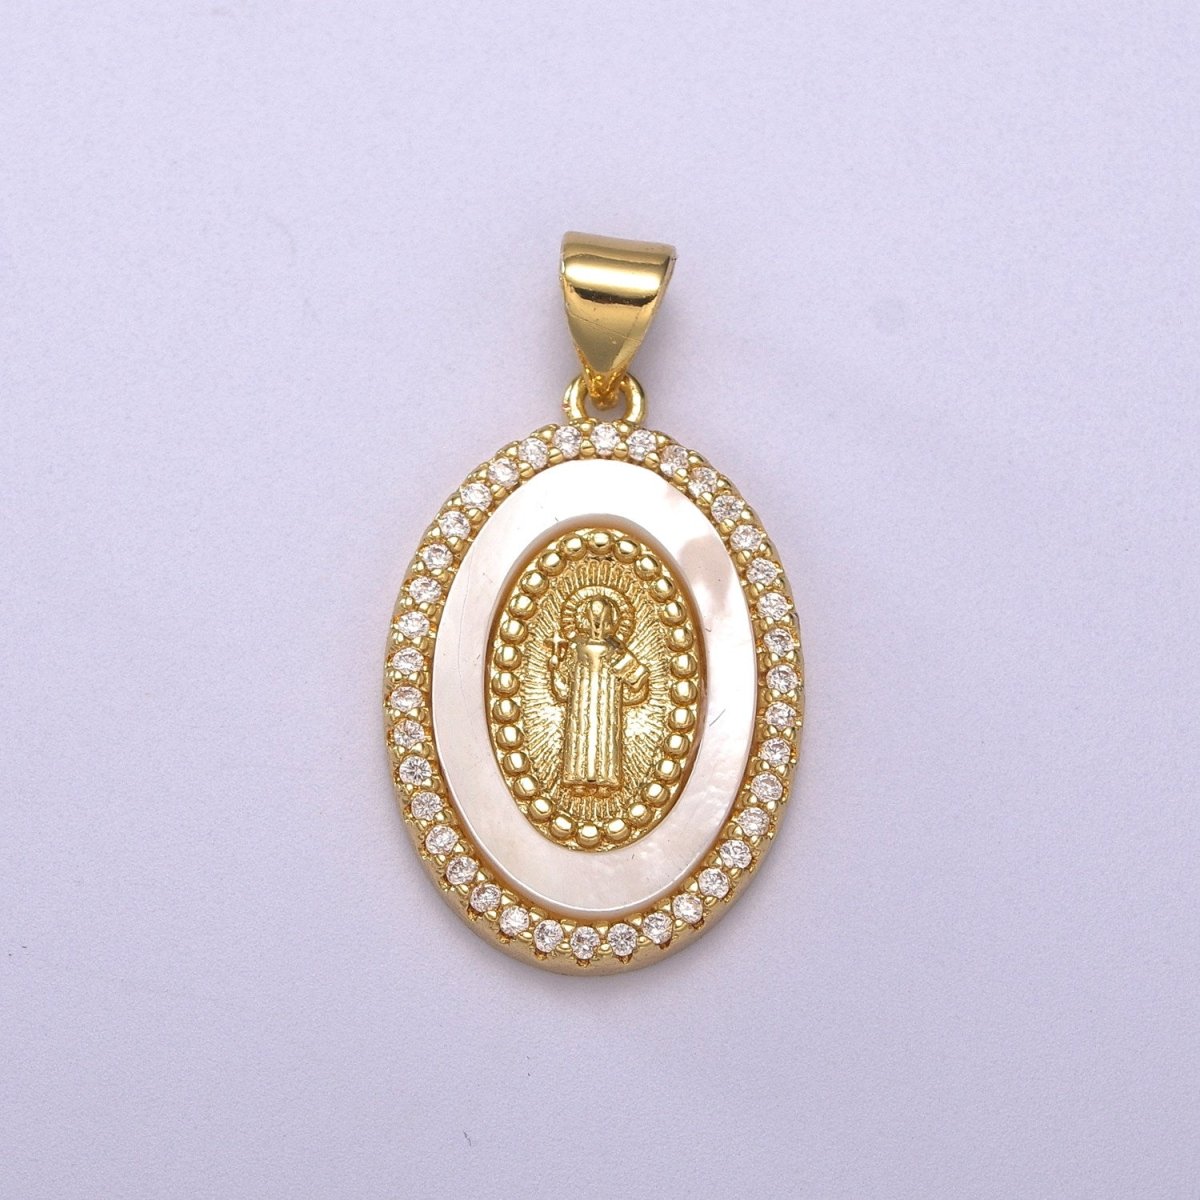 14K Gold Filled Delicate Virgin Mary, Miraculous Lady, Saint Benedict Cubic Zirconia Charm Pearl Pendant for Religious Necklace Bracelet Supply N-1385 N-1386 N-1387 - DLUXCA